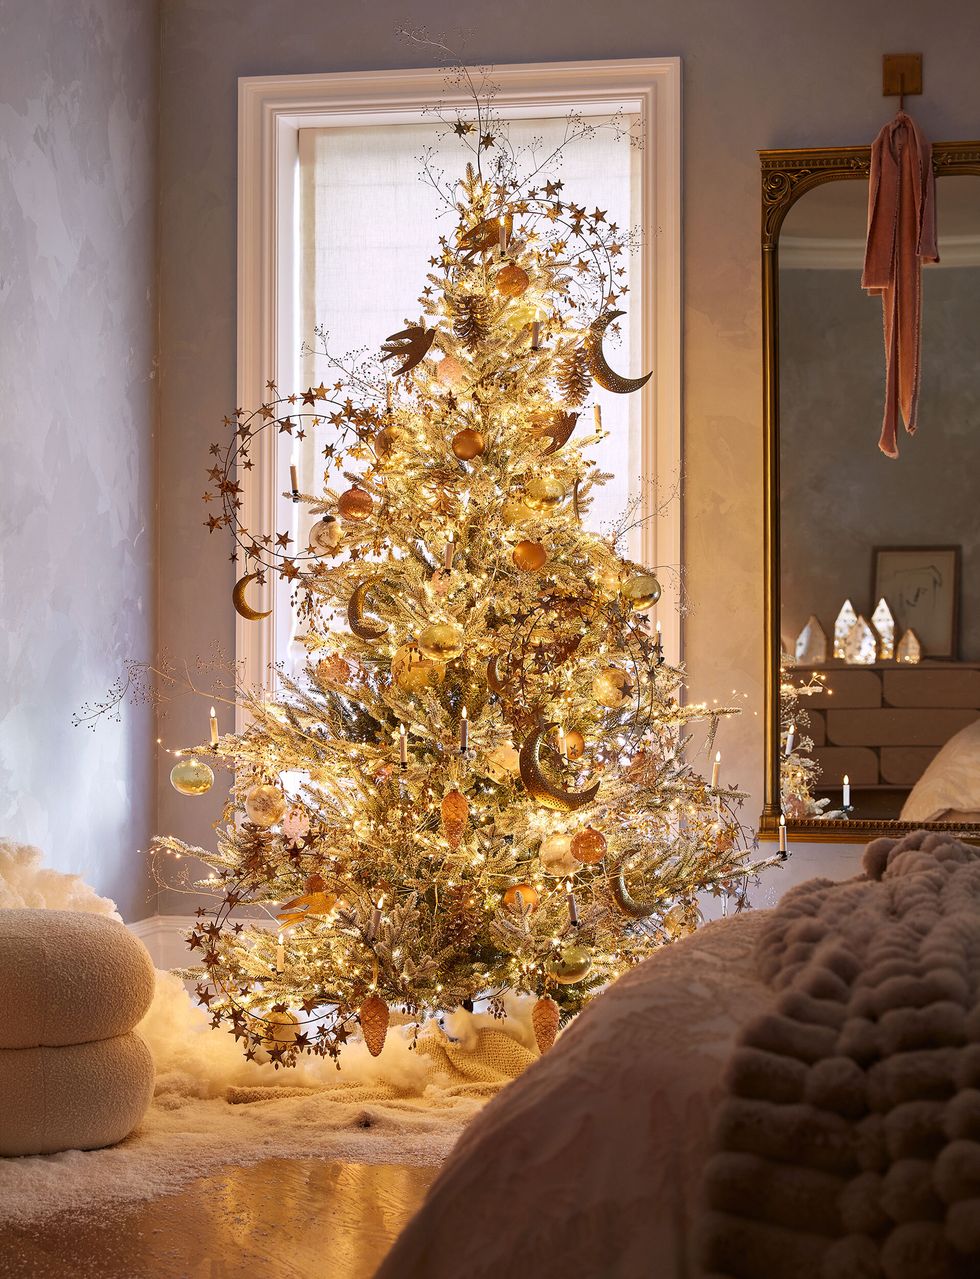 https://hips.hearstapps.com/hmg-prod/images/anthropologie-holiday-house-courtesy-anthropologie-2-65568e762ce0c.jpg?crop=1xw:1xh;center,top&resize=980:*